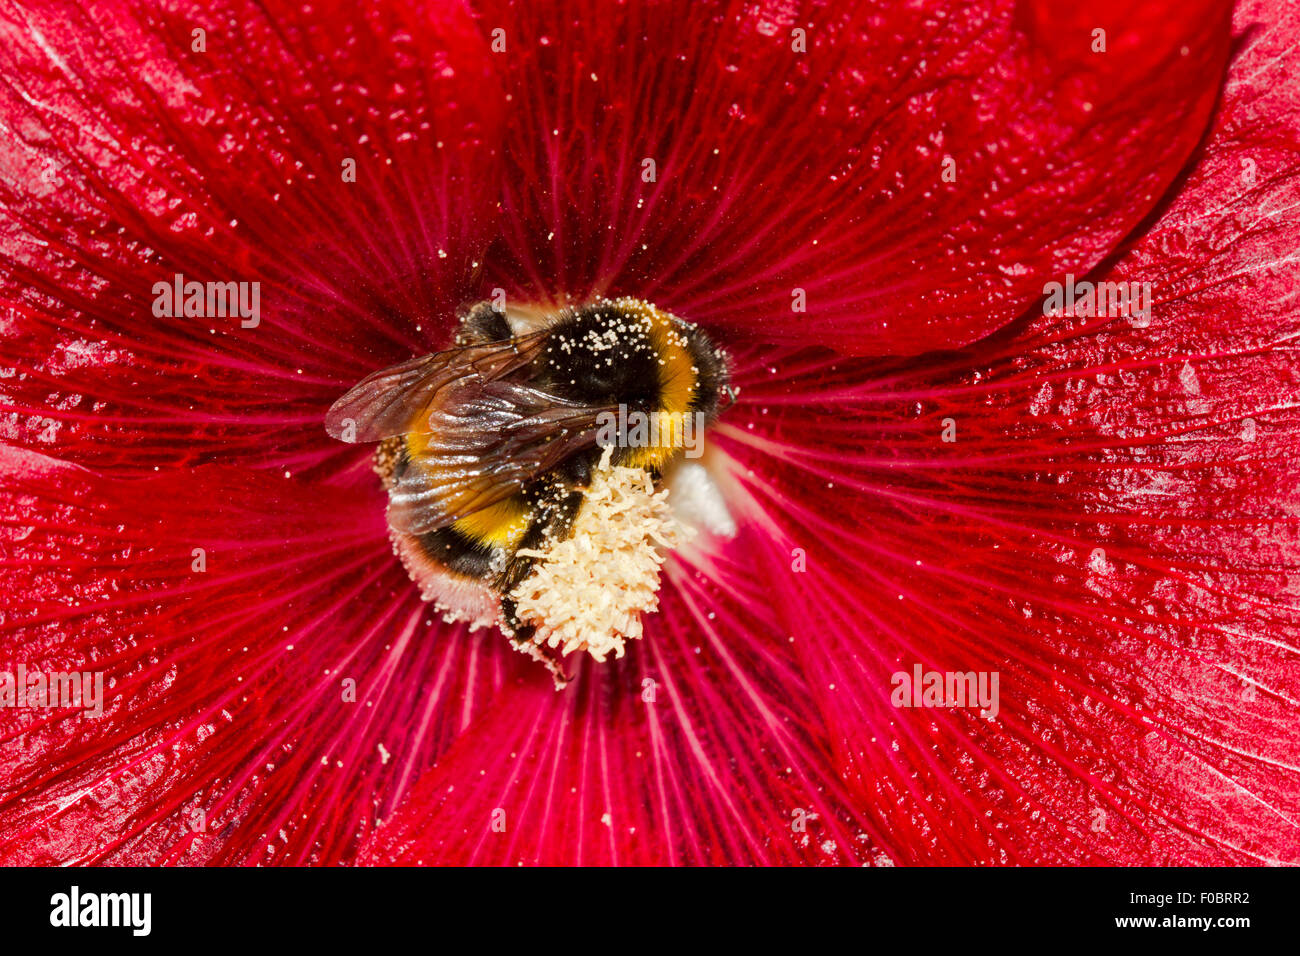 Large earth bumblebee (Bombus terrestris), covered with pollen, in the flower of a red Common hollyhock (Alcea rosea) Stock Photo